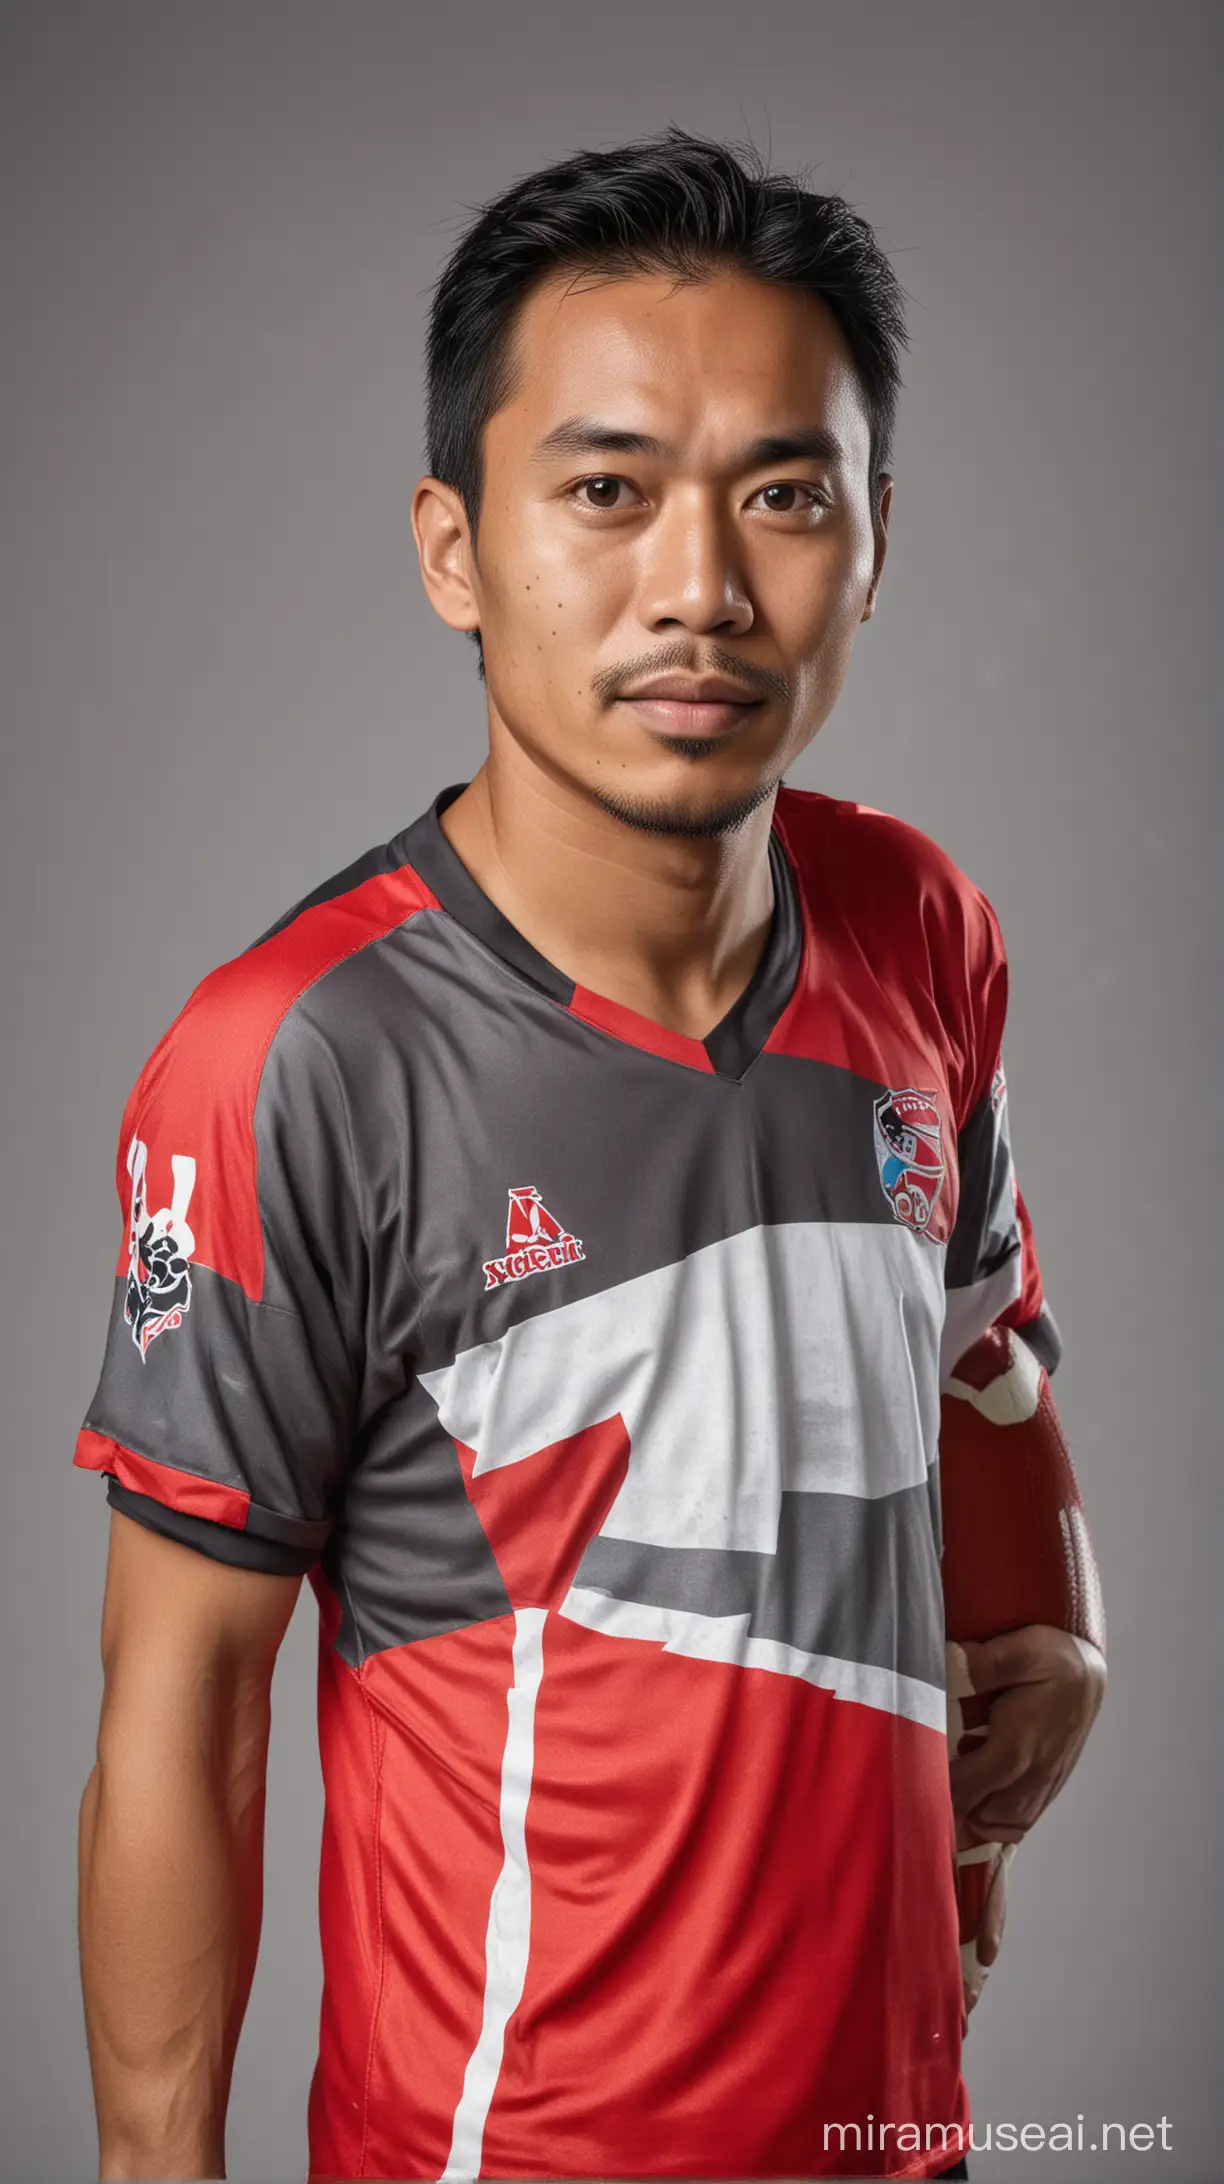 Potrait of An Indonesia Man agen 35 wearing football Jersey, grey background
